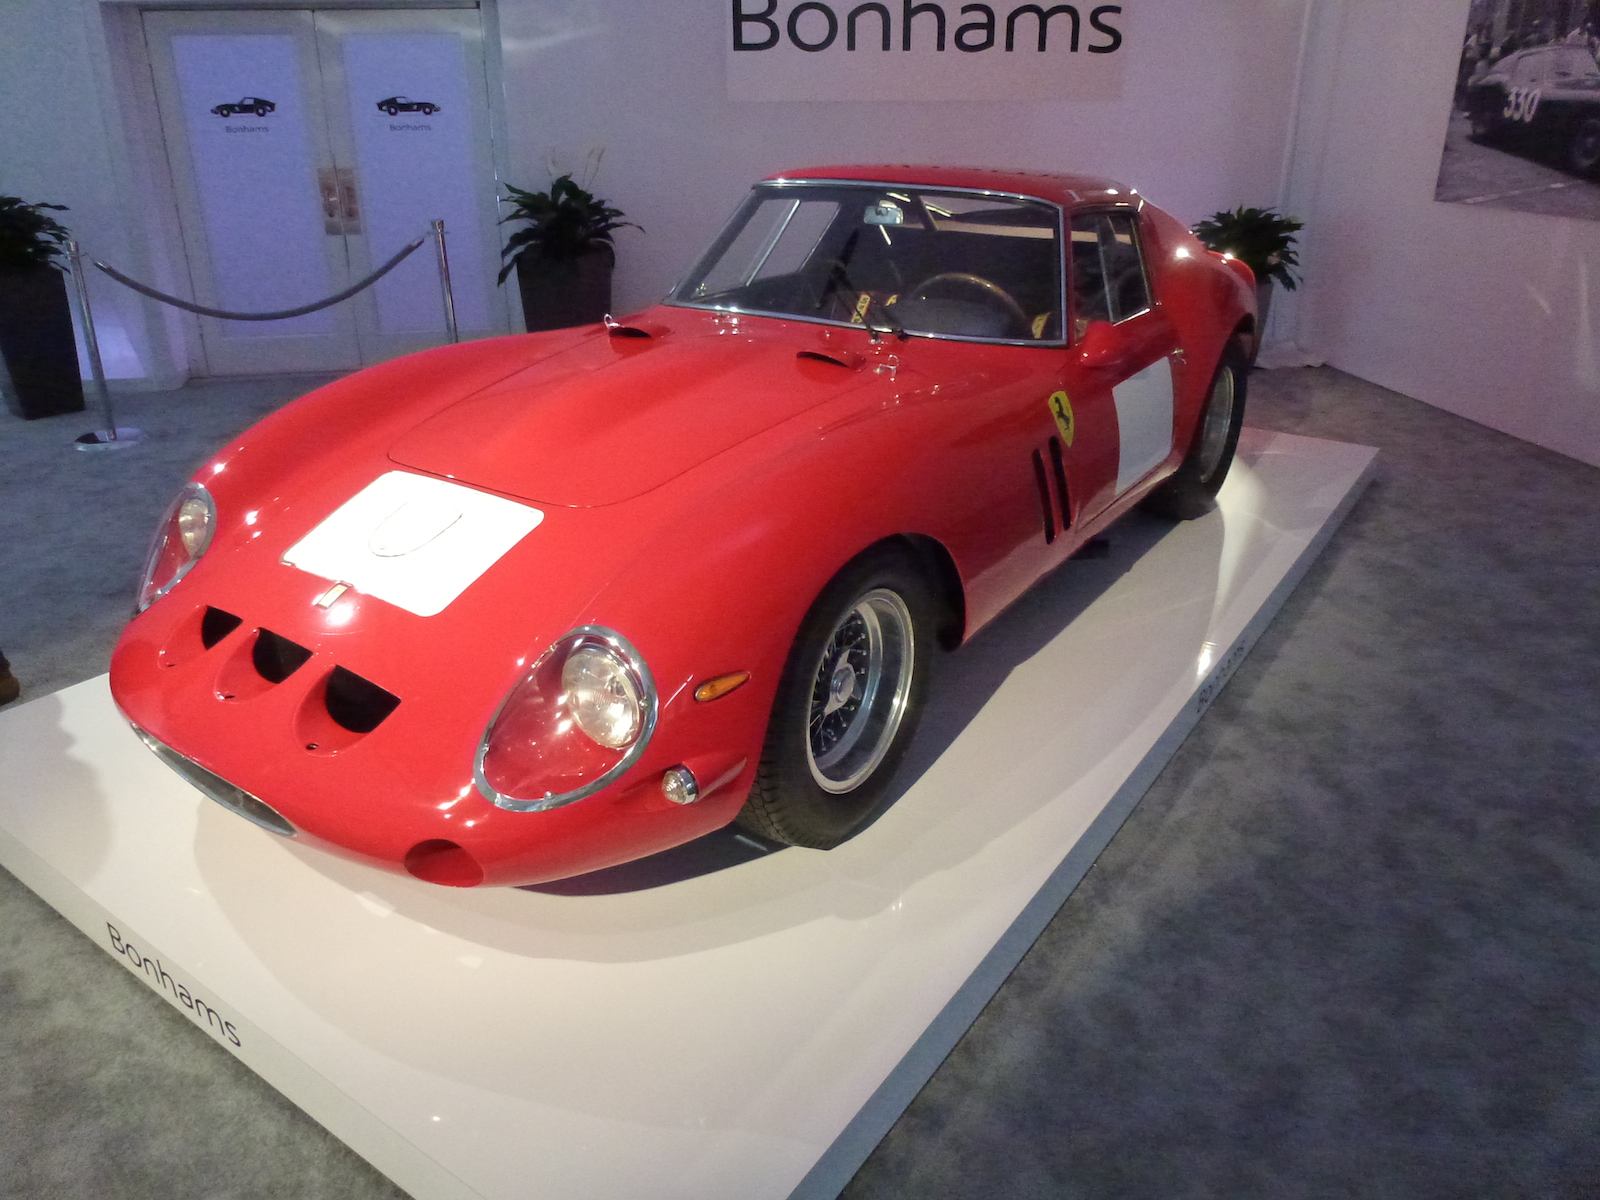 Bonhams Collector Car Auction: The Highest High And The Lowest Low